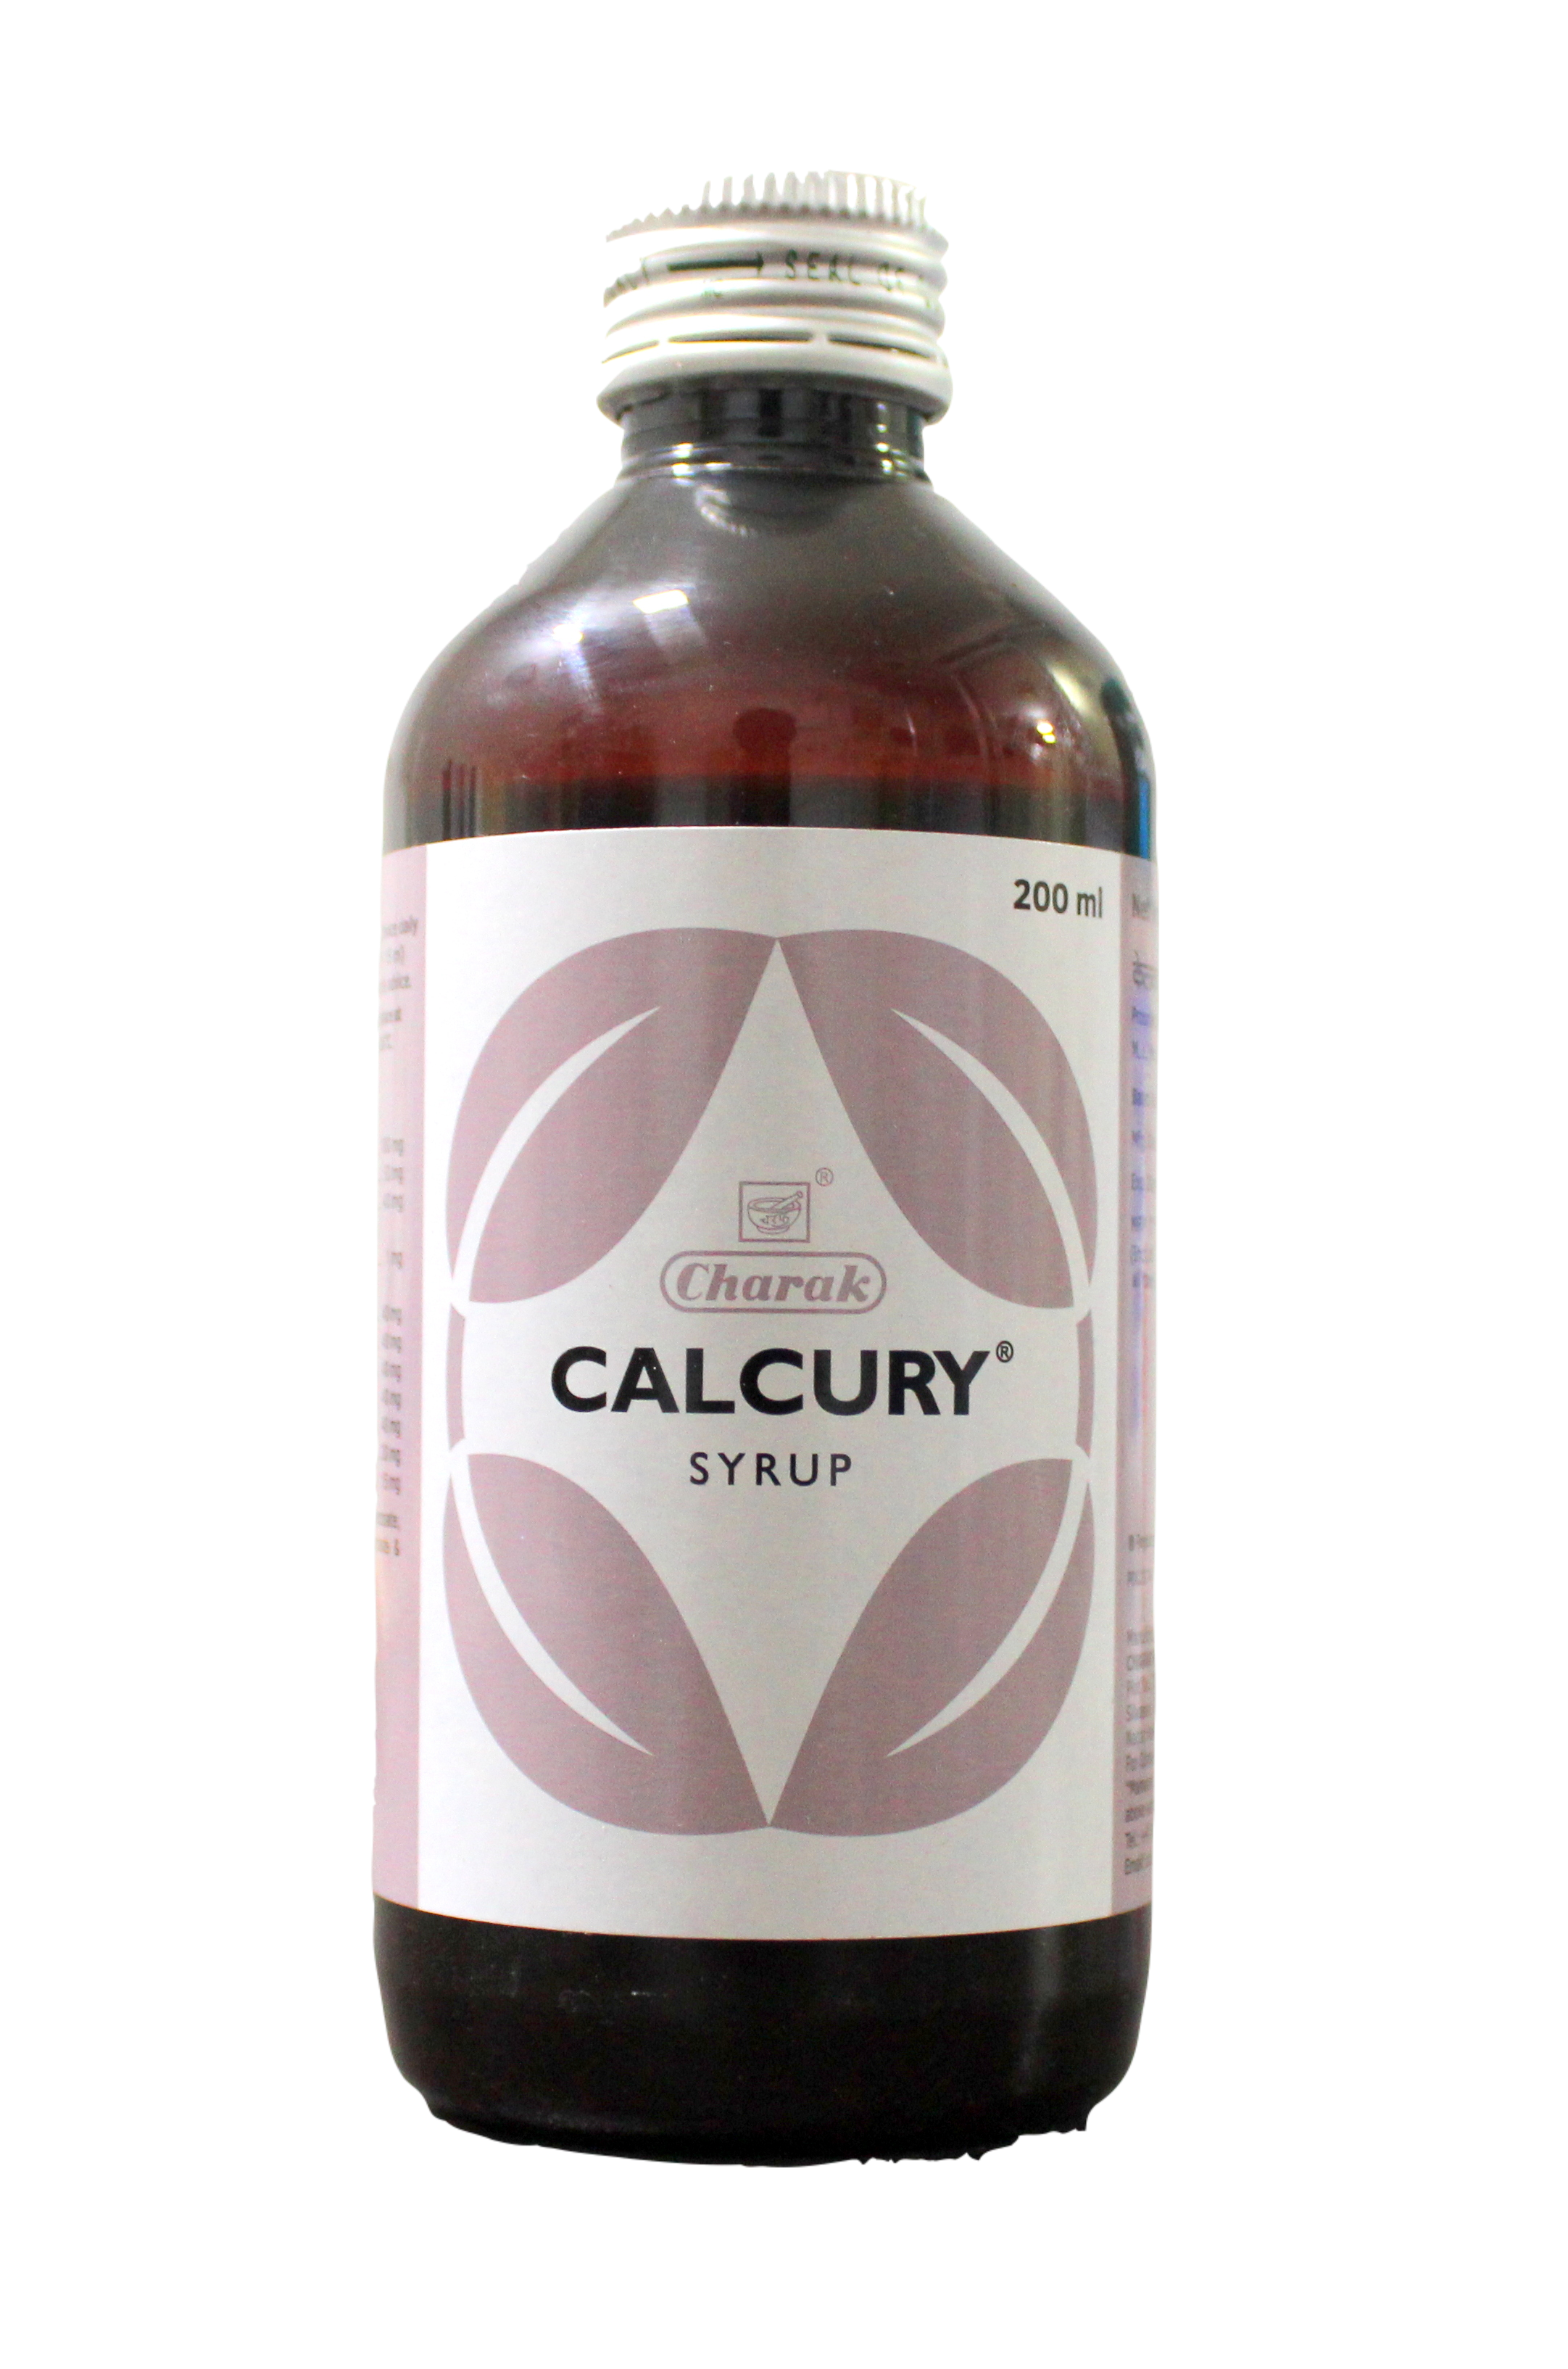 Shop Calcury Syrup 200ml at price 199.00 from Charak Online - Ayush Care